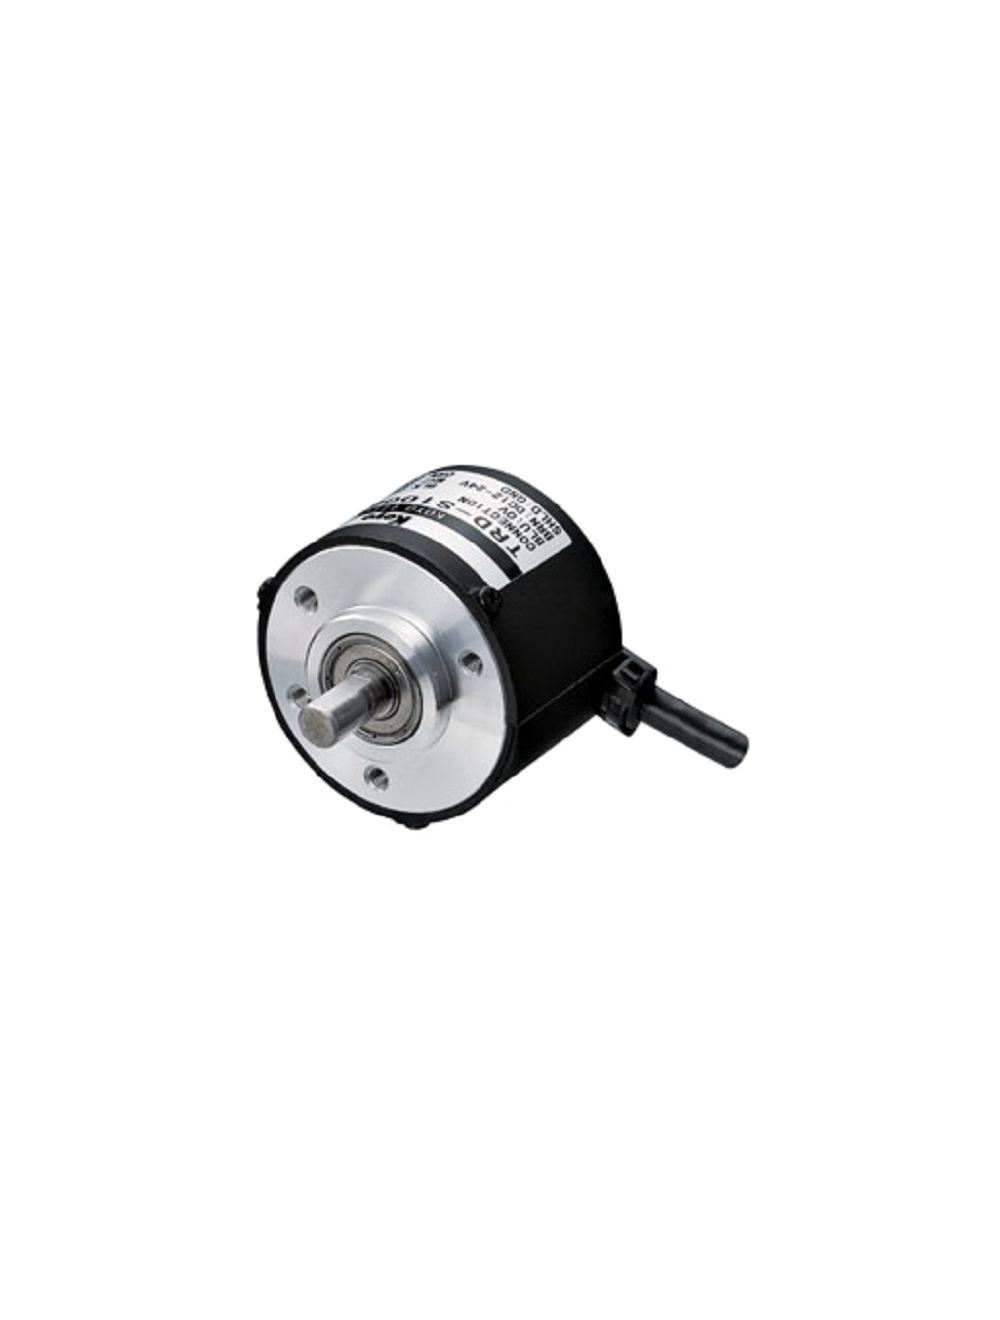 New In stock for sale, KOYO Solid-shaft Incremental Rotary Encoder TRD-S600B